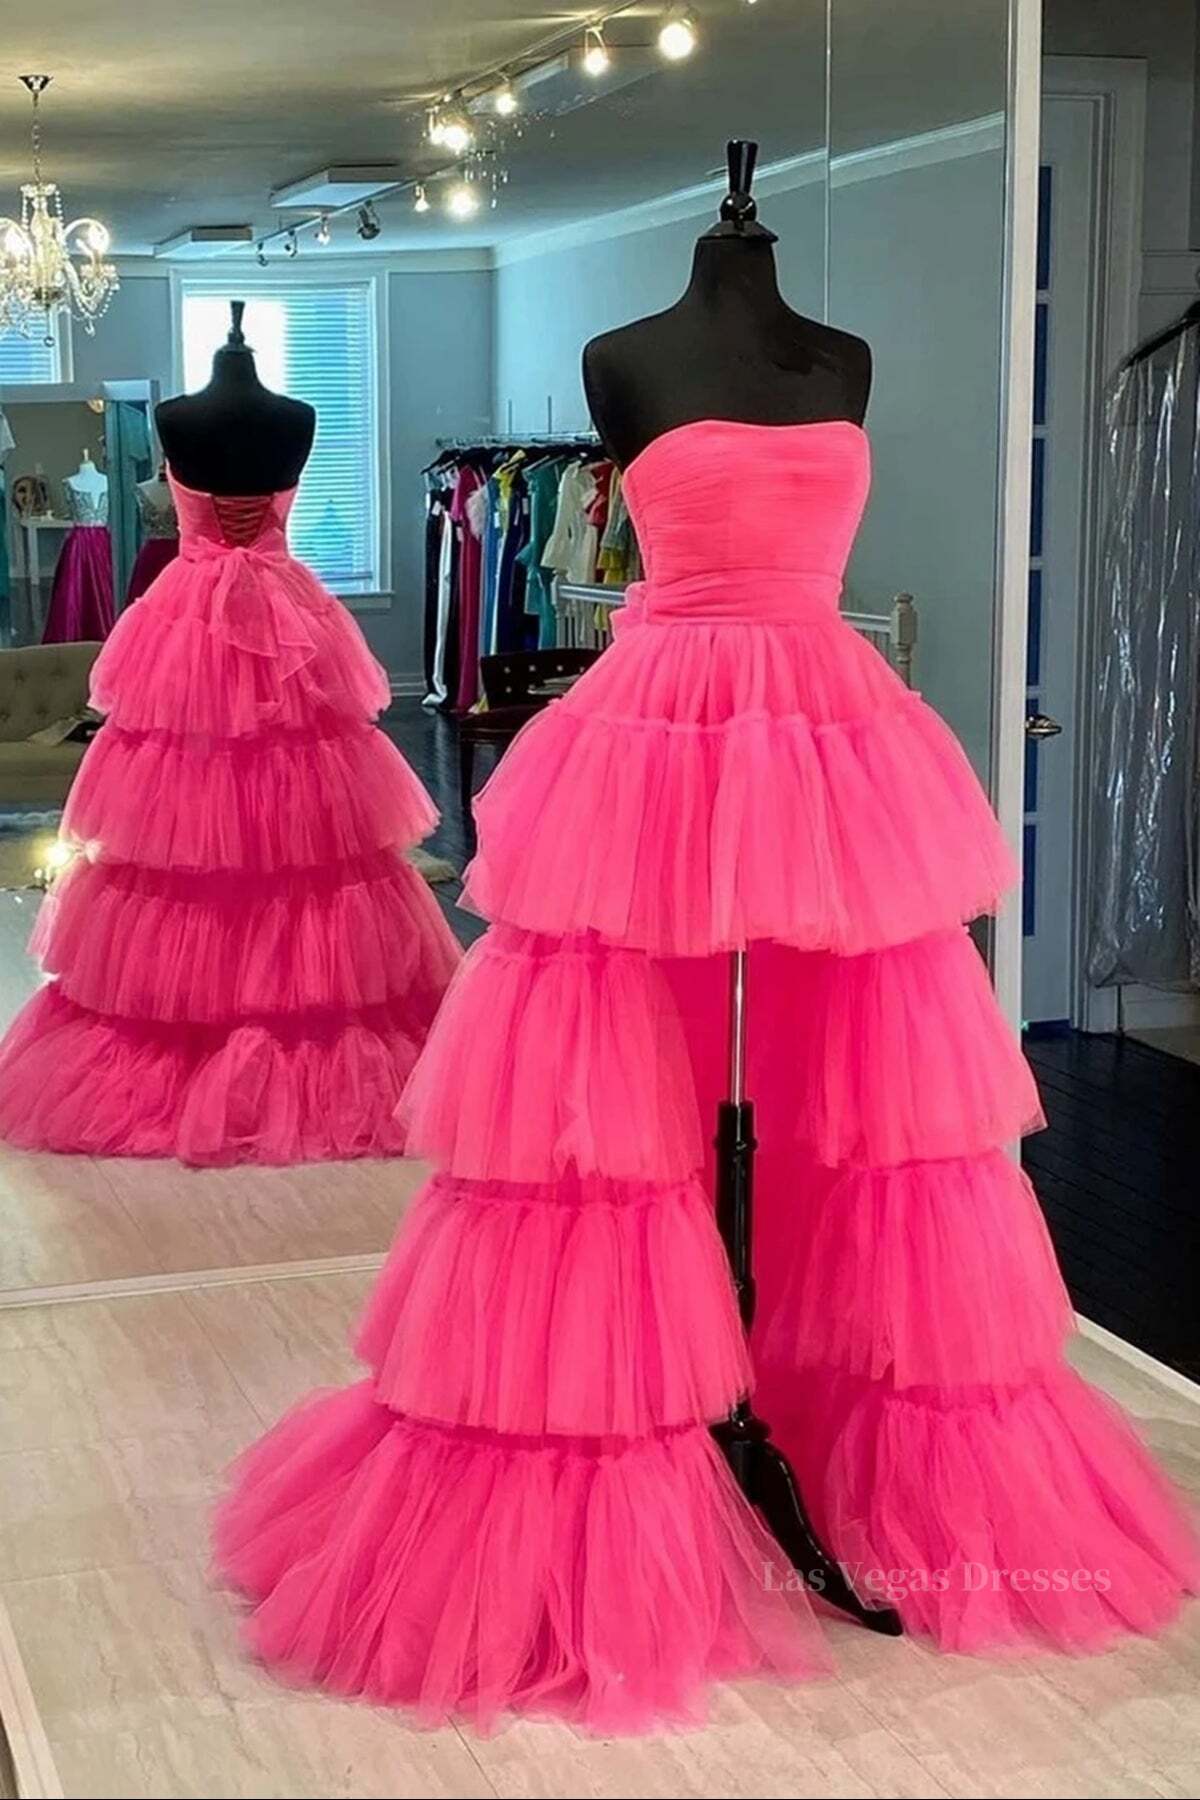 Strapless Hot Pink High Low Prom Dresses, Hot Pink High Low Formal Homecoming Dresses